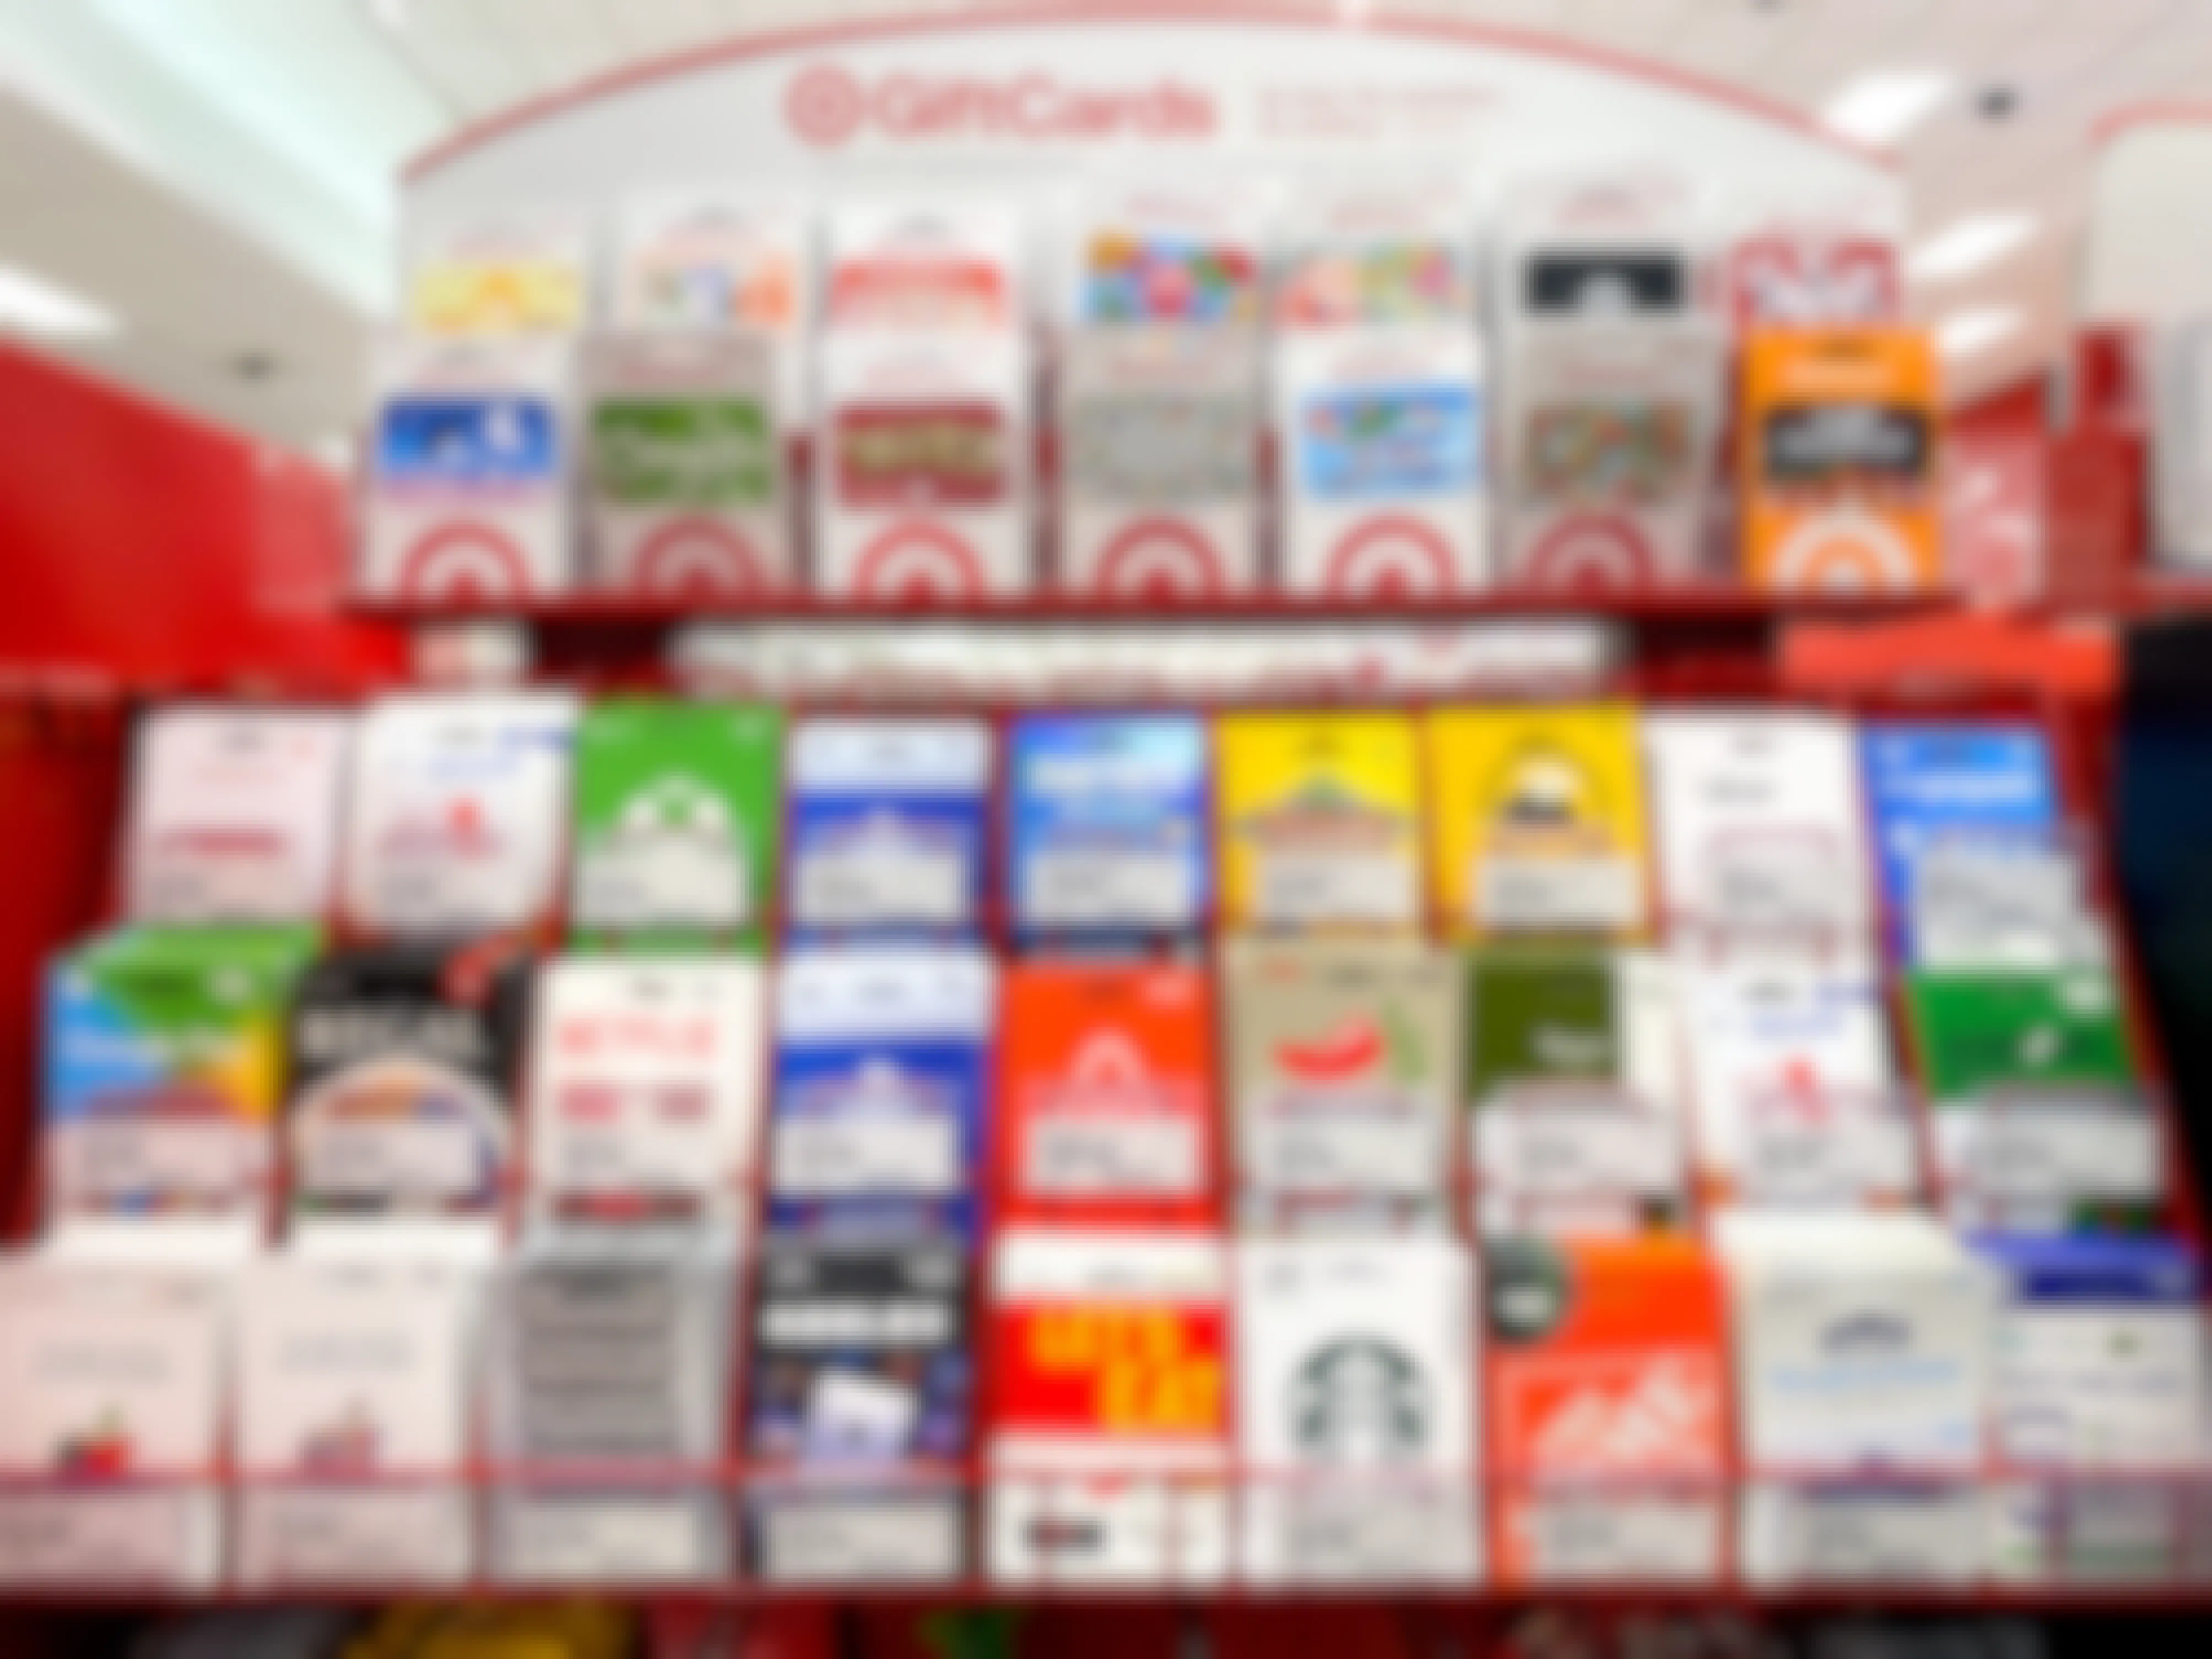 various gift cards on display at target checkout